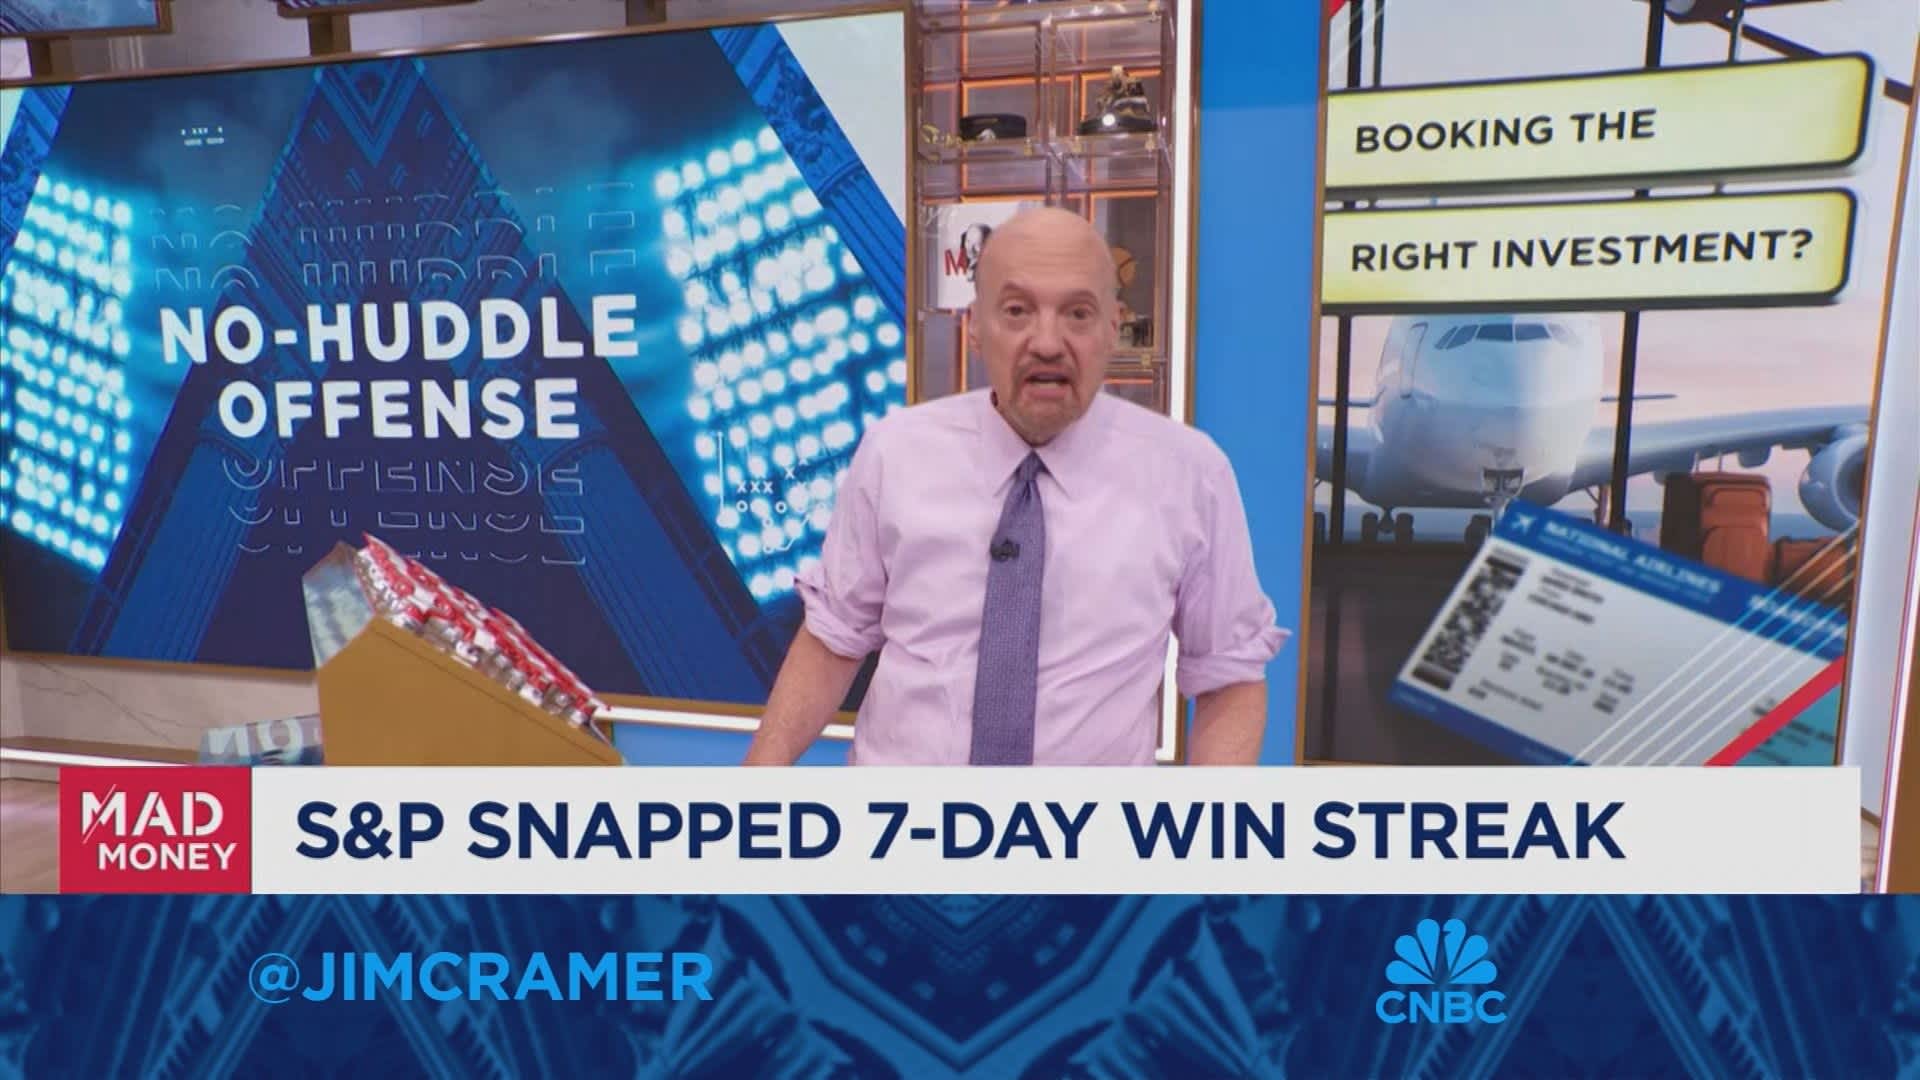 'None of the airlines are worth buying here', says Jim Cramer